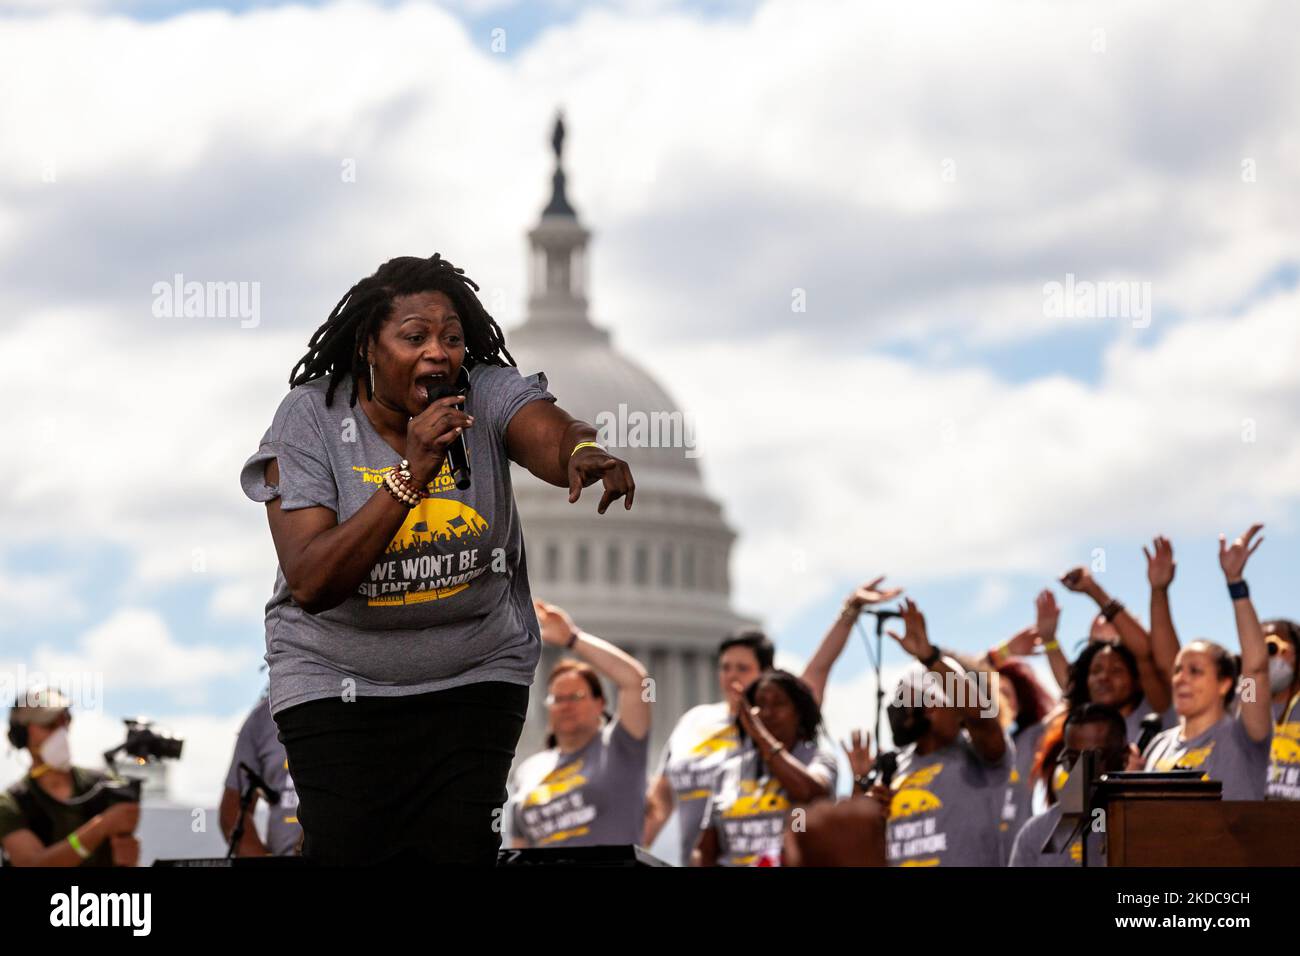 A band and choir perform songs from the 1960s civil rights movement during the Poor People's Campaign's (PPC) Moral March on Washington and to the Polls. The event calls attention to the level of poverty and economic instability in the US and the disproportionate coronavirus mortality rate among the poor and low-income, and demands more equitable distribution of resources throughout society and voting rights for all Americans. Hundreds of organizations and thousands of people participated in the march. (Photo by Allison Bailey/NurPhoto) Stock Photo